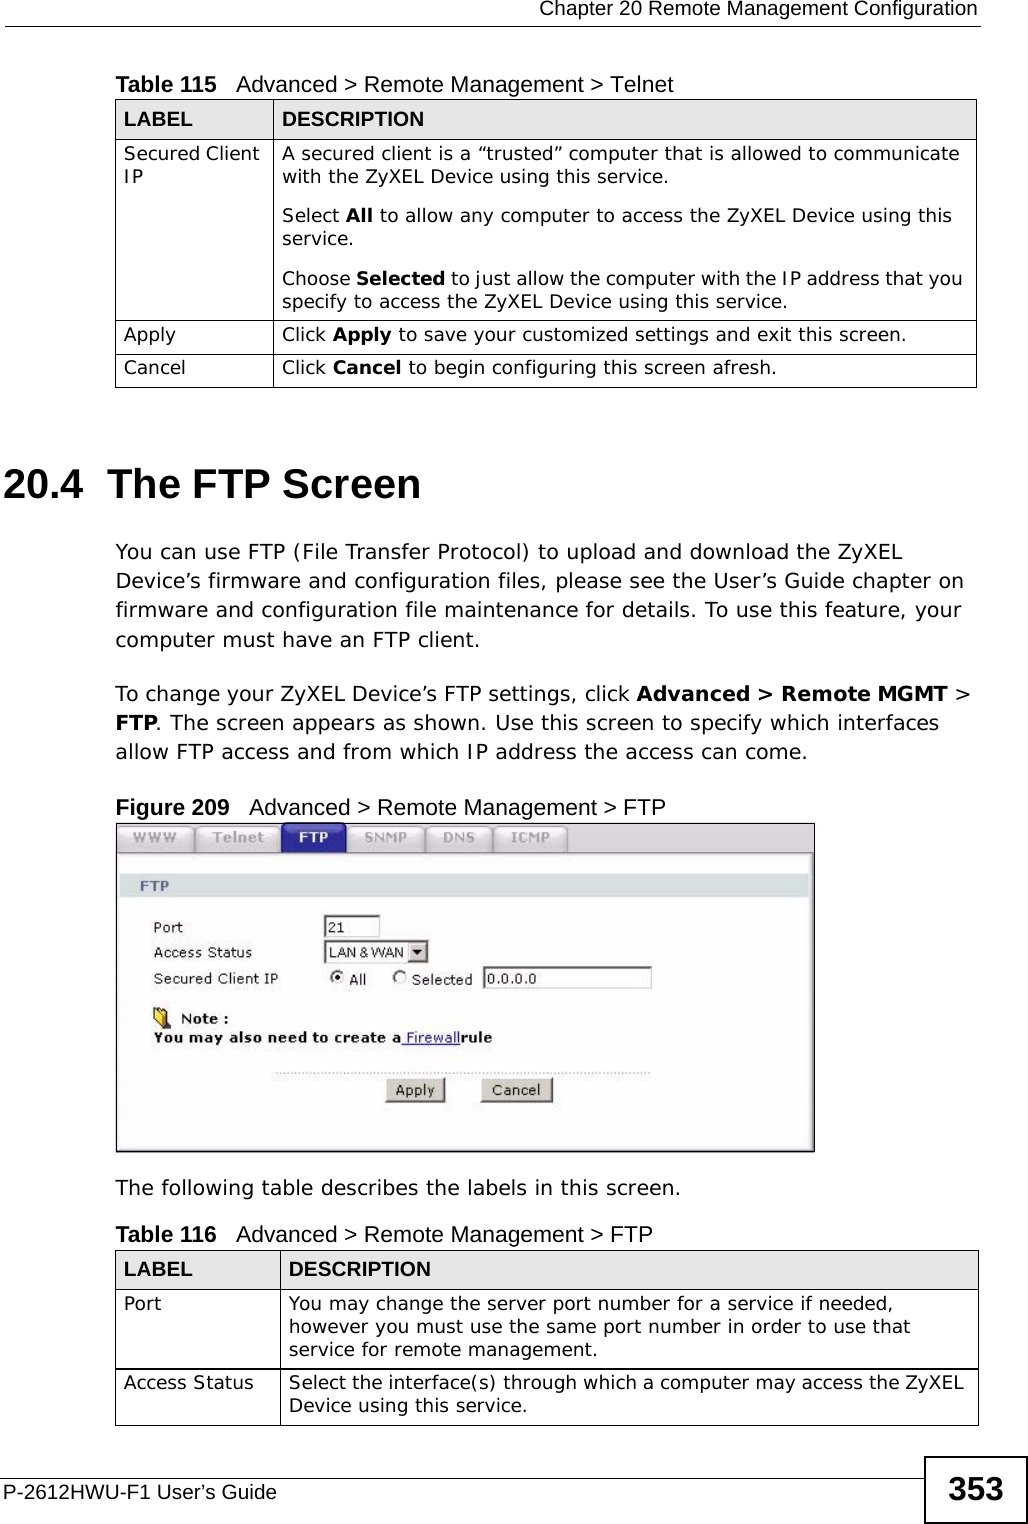  Chapter 20 Remote Management ConfigurationP-2612HWU-F1 User’s Guide 35320.4  The FTP Screen You can use FTP (File Transfer Protocol) to upload and download the ZyXEL Device’s firmware and configuration files, please see the User’s Guide chapter on firmware and configuration file maintenance for details. To use this feature, your computer must have an FTP client.To change your ZyXEL Device’s FTP settings, click Advanced &gt; Remote MGMT &gt; FTP. The screen appears as shown. Use this screen to specify which interfaces allow FTP access and from which IP address the access can come. Figure 209   Advanced &gt; Remote Management &gt; FTPThe following table describes the labels in this screen. Secured Client IP A secured client is a “trusted” computer that is allowed to communicate with the ZyXEL Device using this service. Select All to allow any computer to access the ZyXEL Device using this service.Choose Selected to just allow the computer with the IP address that you specify to access the ZyXEL Device using this service.Apply Click Apply to save your customized settings and exit this screen. Cancel Click Cancel to begin configuring this screen afresh.Table 115   Advanced &gt; Remote Management &gt; TelnetLABEL DESCRIPTIONTable 116   Advanced &gt; Remote Management &gt; FTPLABEL DESCRIPTIONPort You may change the server port number for a service if needed, however you must use the same port number in order to use that service for remote management.Access Status Select the interface(s) through which a computer may access the ZyXEL Device using this service.